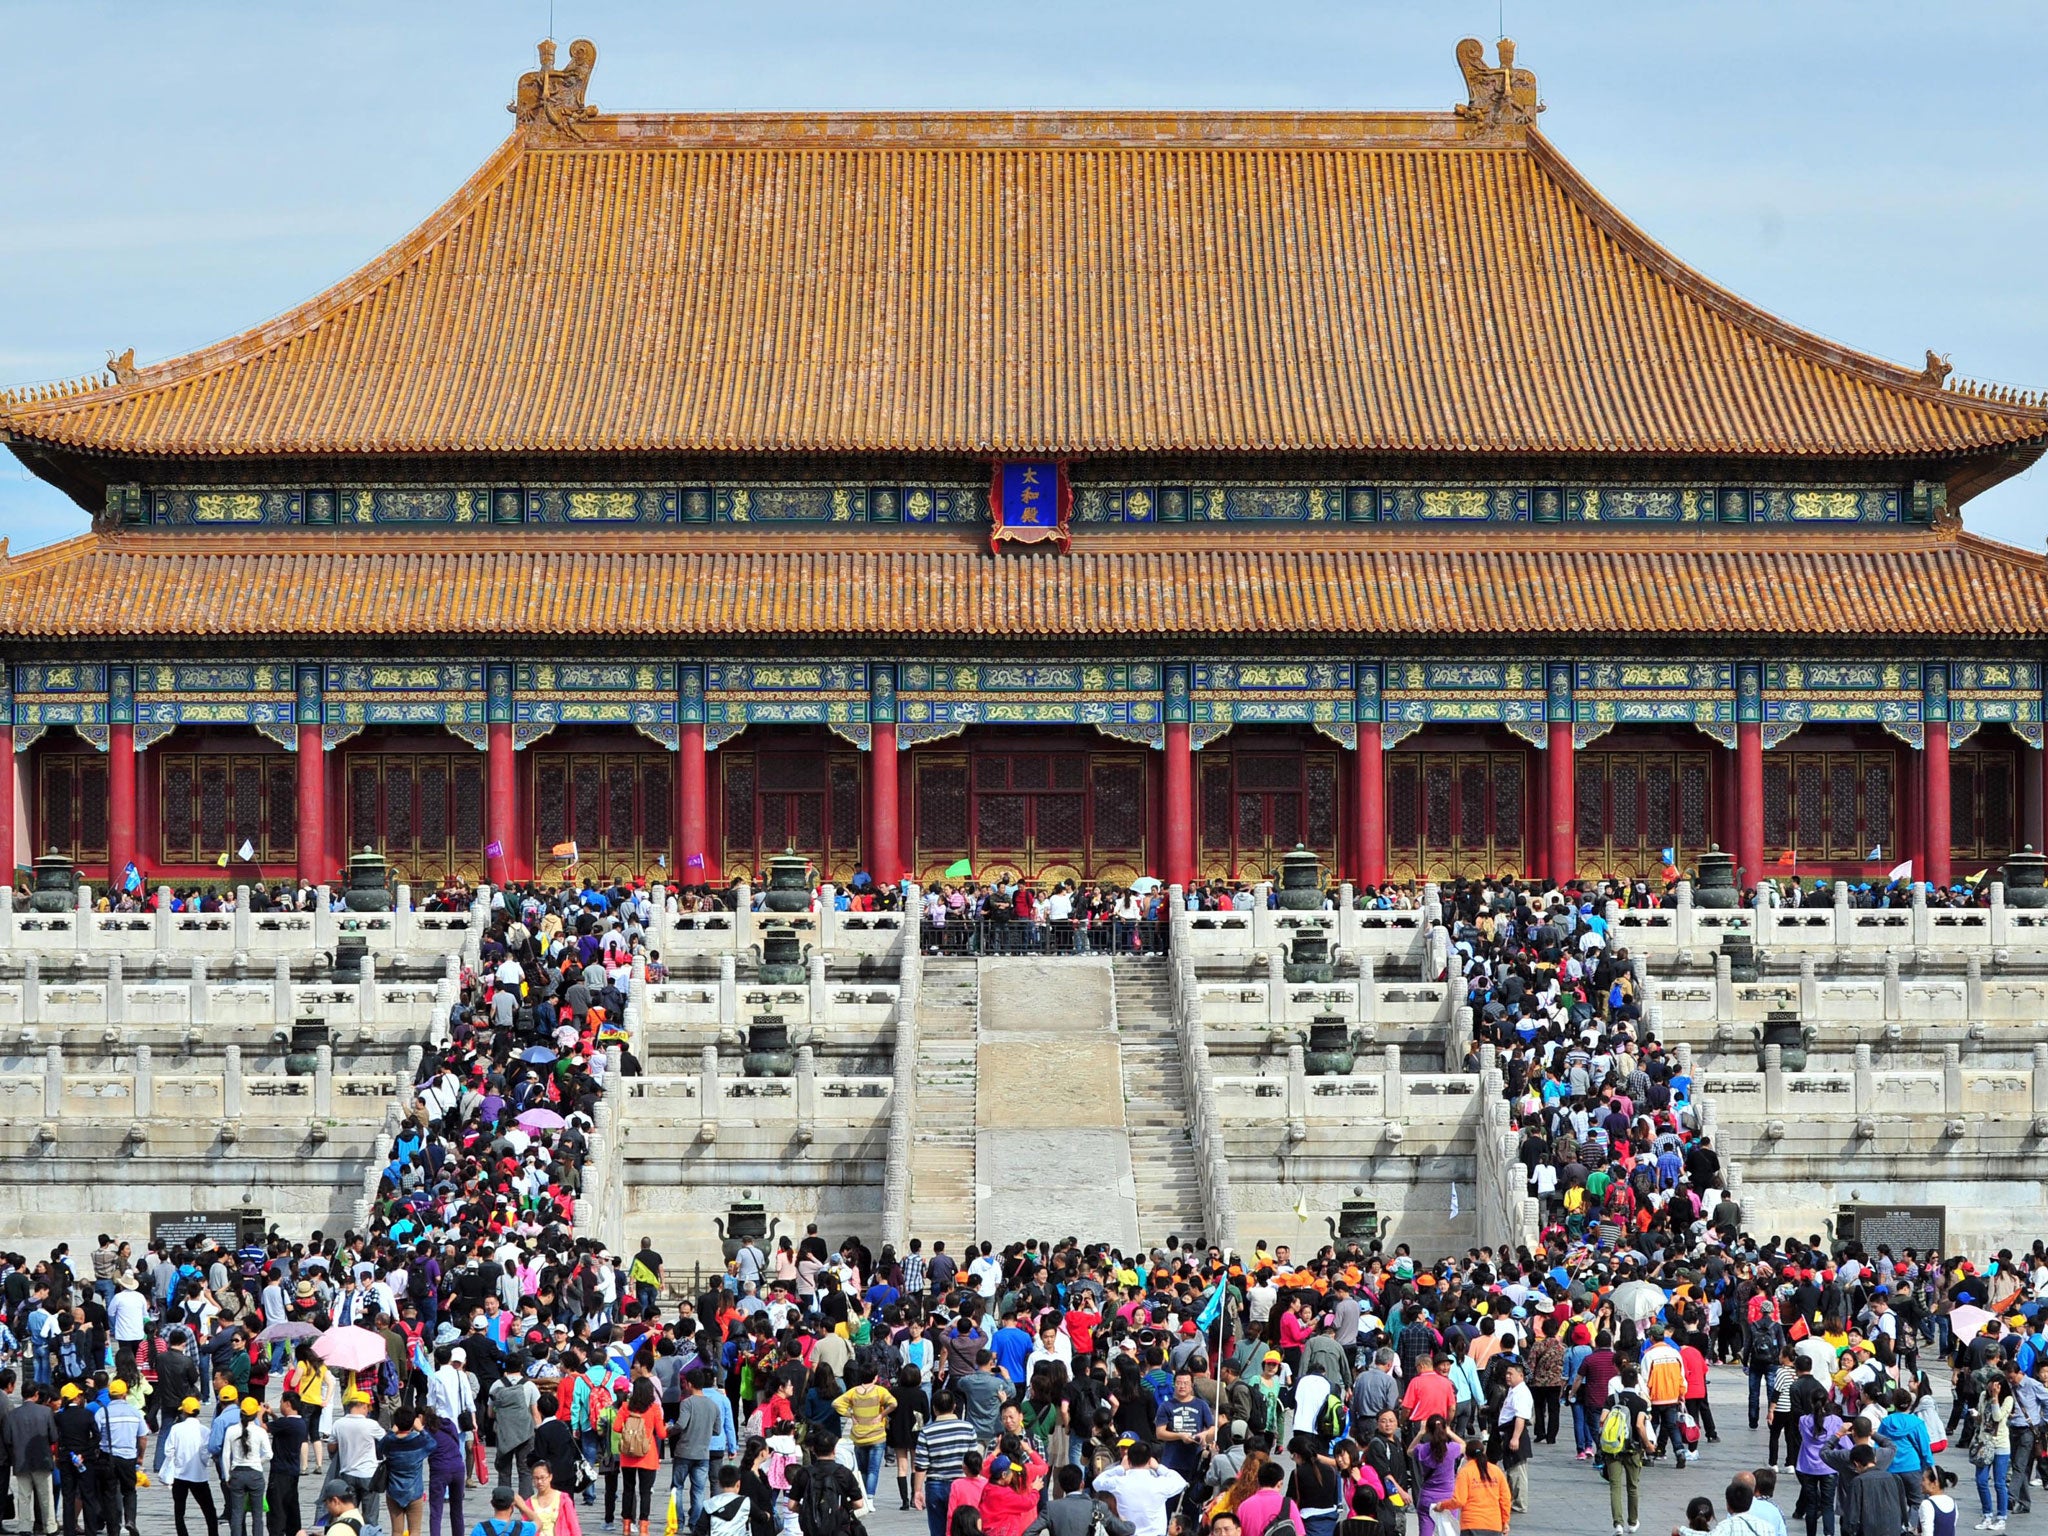 The Forbidden City is now a major tourist attraction